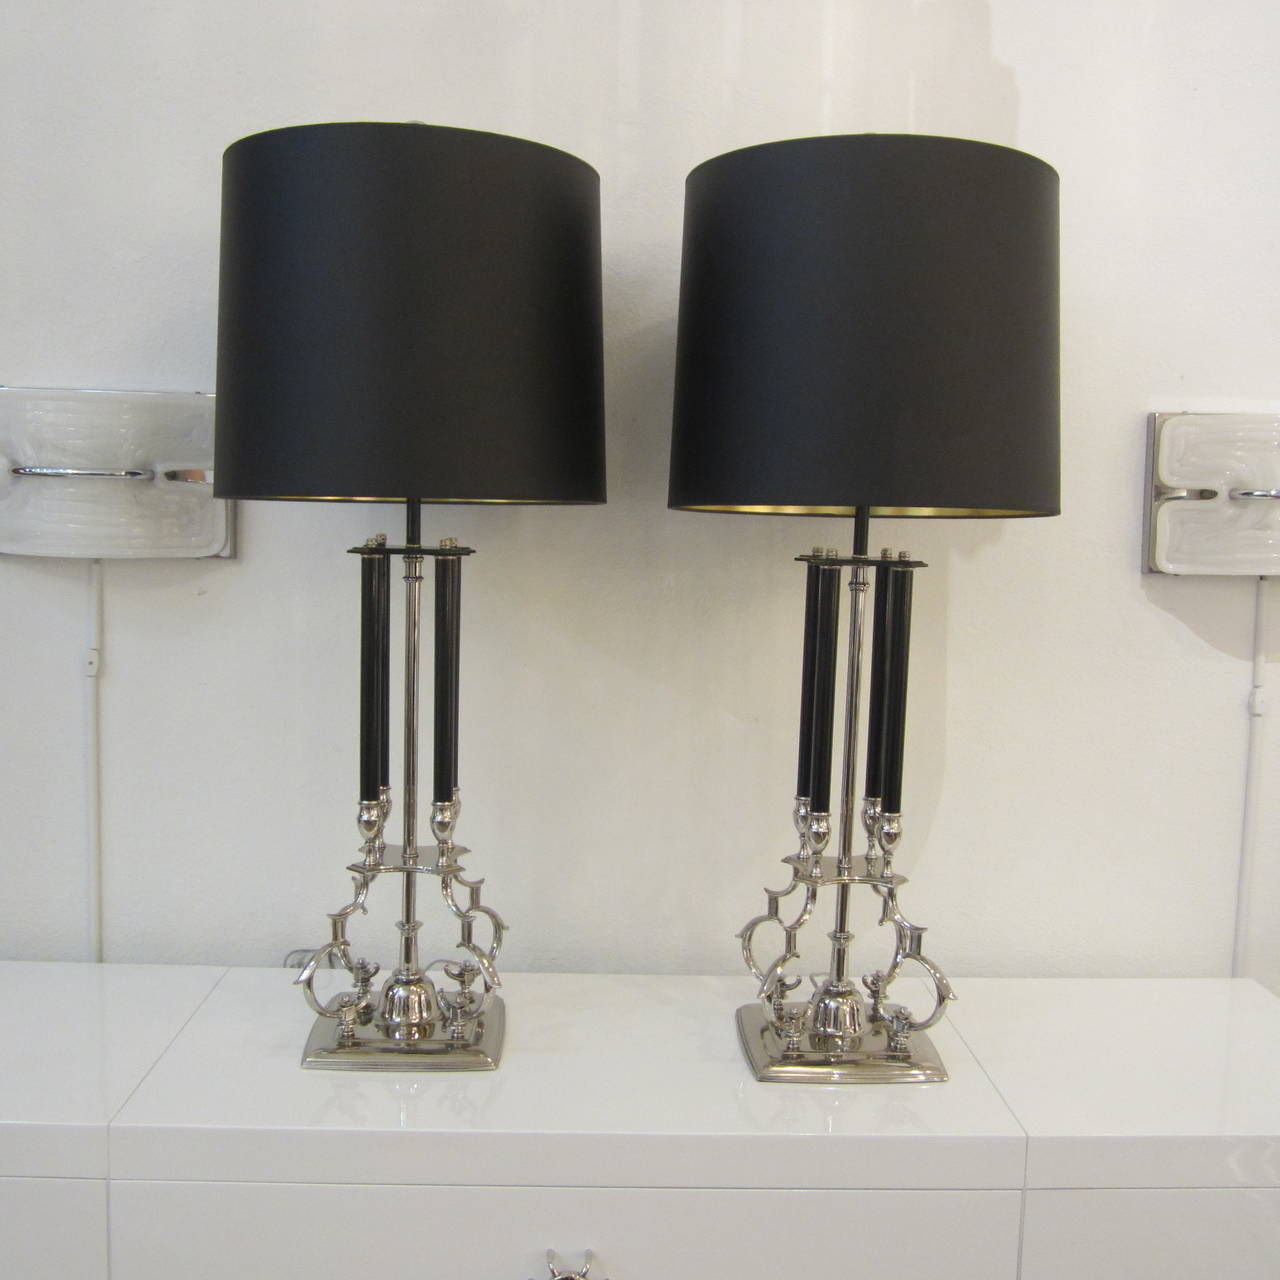 Pair of tabletop lamps featuring nickeled, scrolled metalwork and black painted metal columns with double light bulb sockets. Newly rewired and appointed. Original ring finials included. Sold as a pair without the shades.